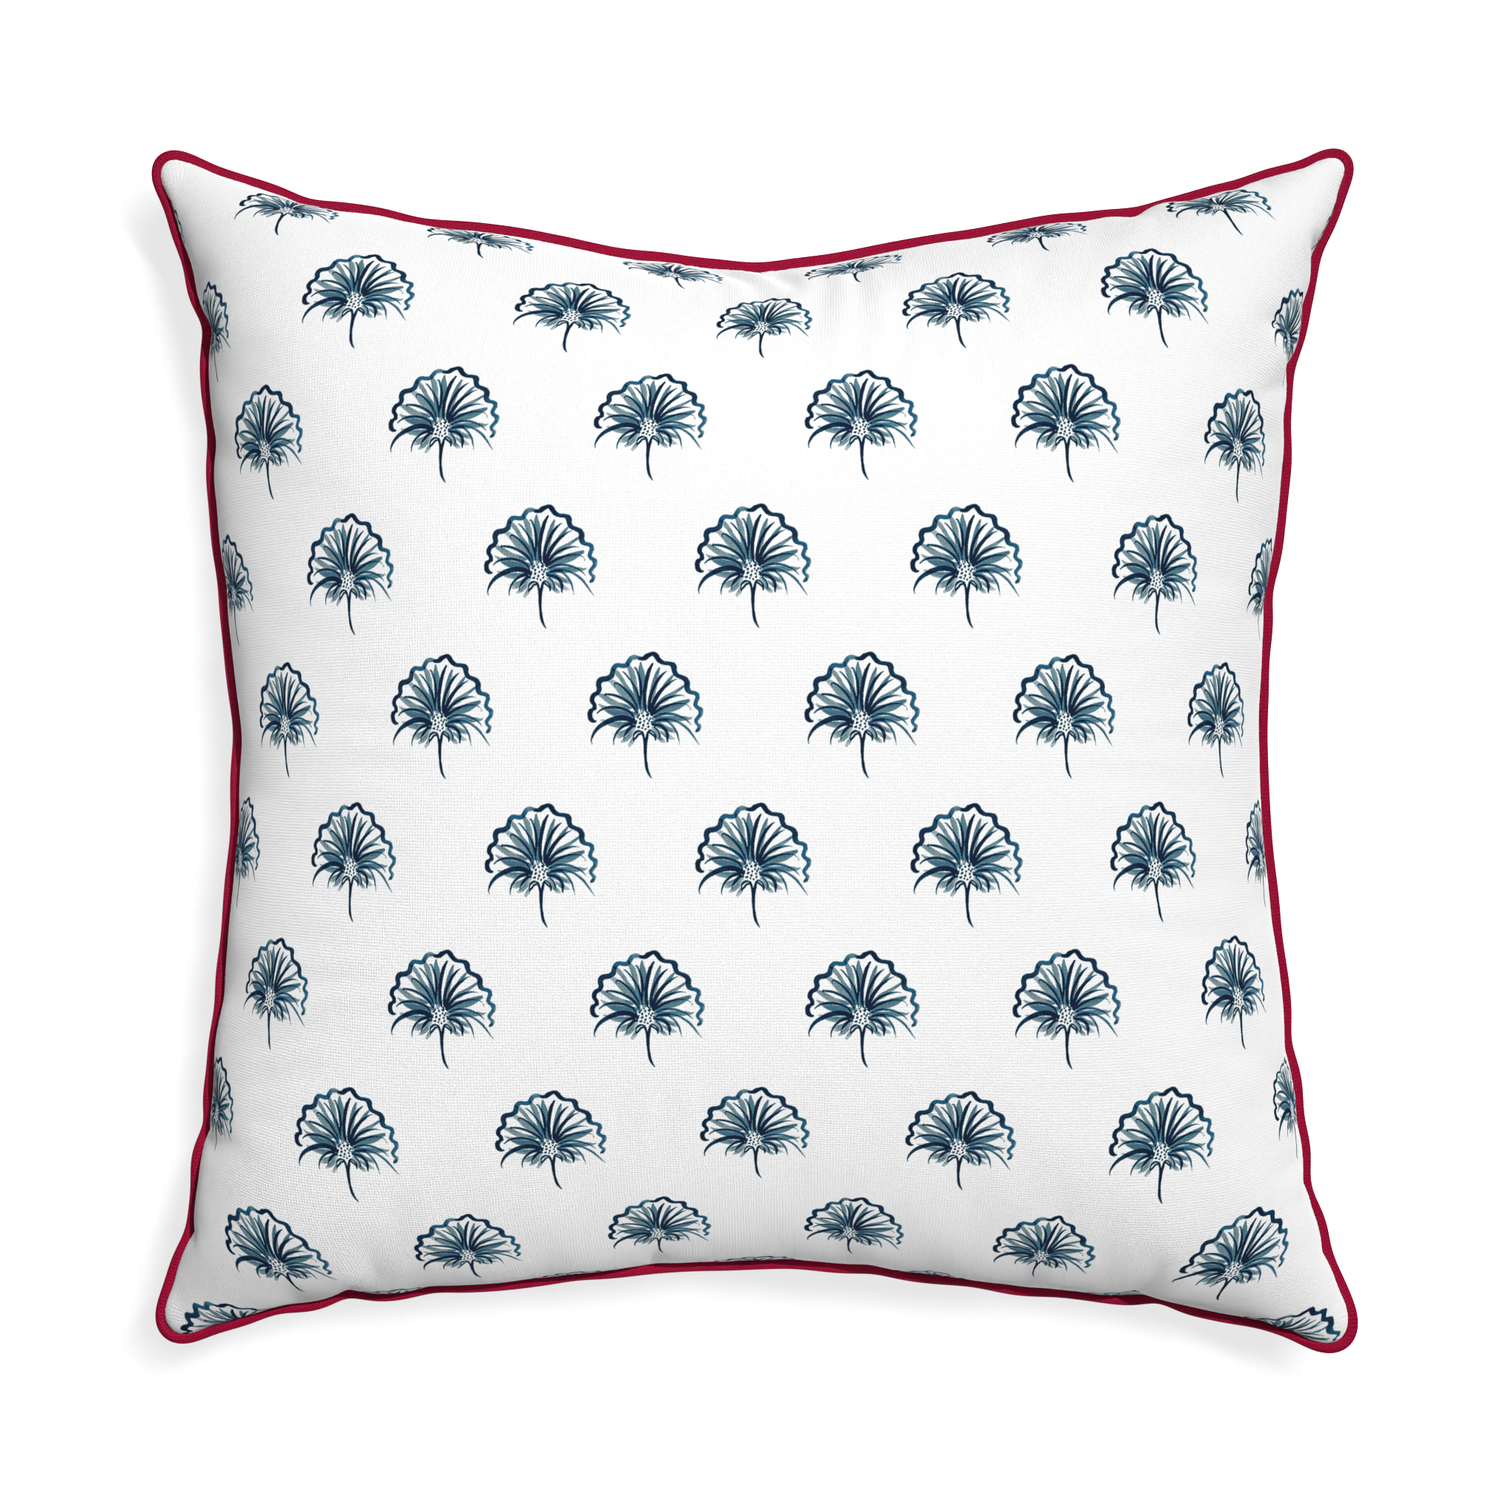 Euro-sham penelope midnight custom floral navypillow with raspberry piping on white background